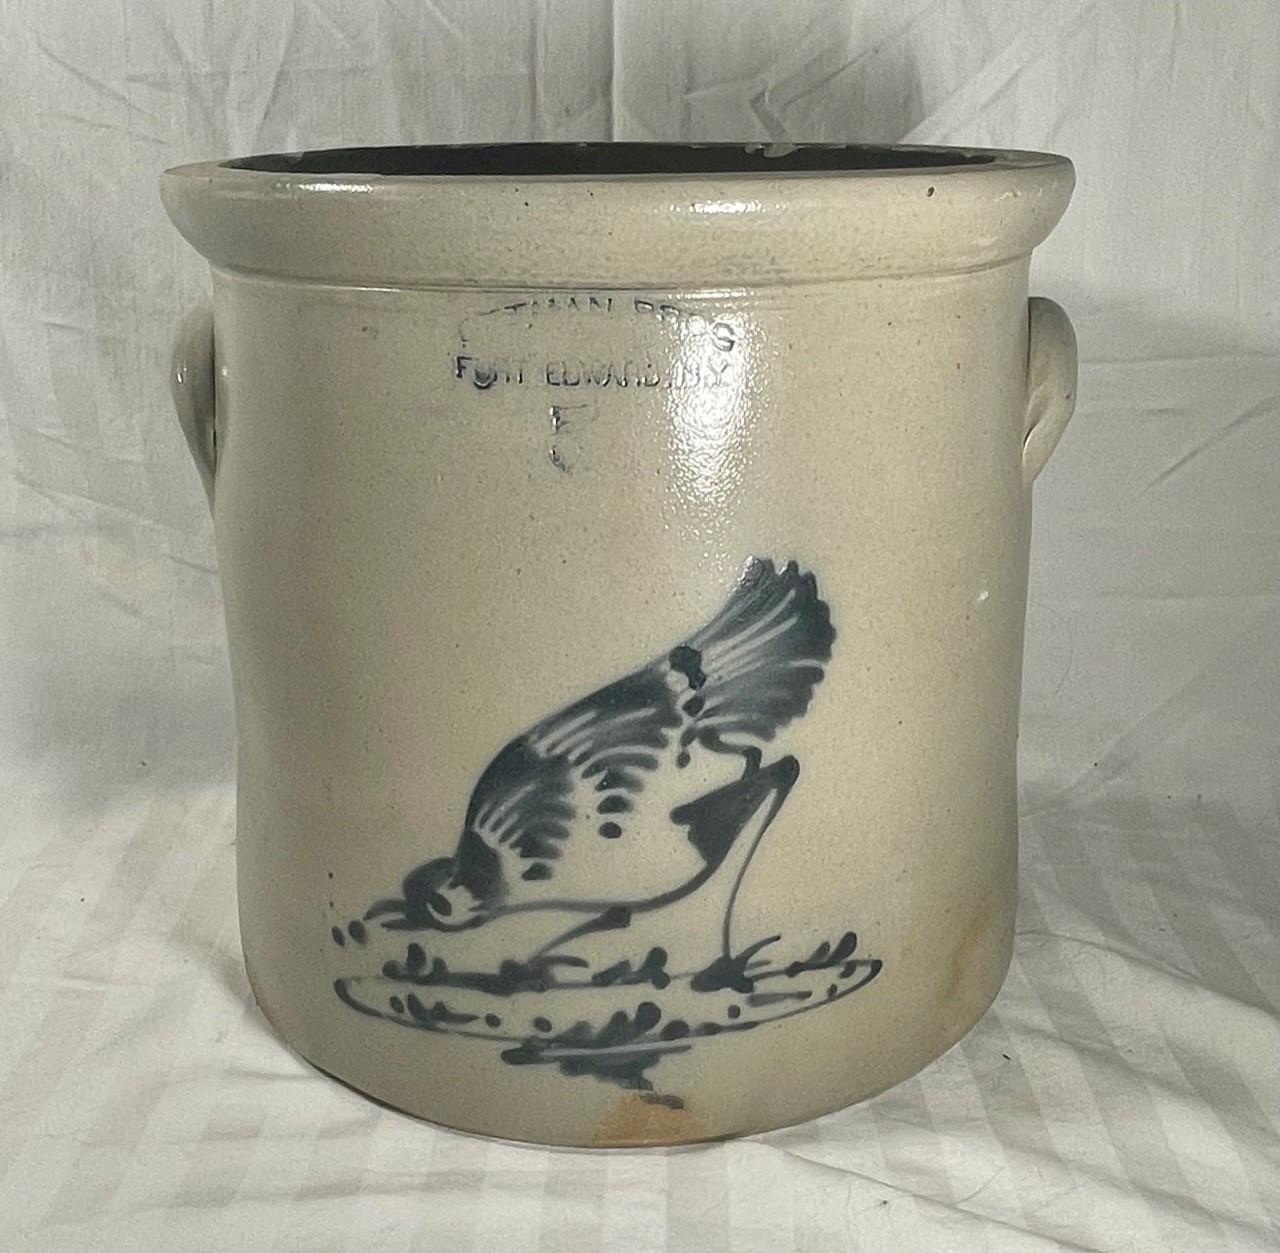 Stoneware Crock Ottman Bros Fort Edward, NY, Cobalt Pecking Bird Decoration.

Late 19th Century Five-Gallon Stoneware Cake Crock with Pecking Cobalt Bird is Stamped, “OTTMAN BRO’S/ & CO/ PORT EDWARD, N.Y.”
Cylindrical crock with tooled shoulder,